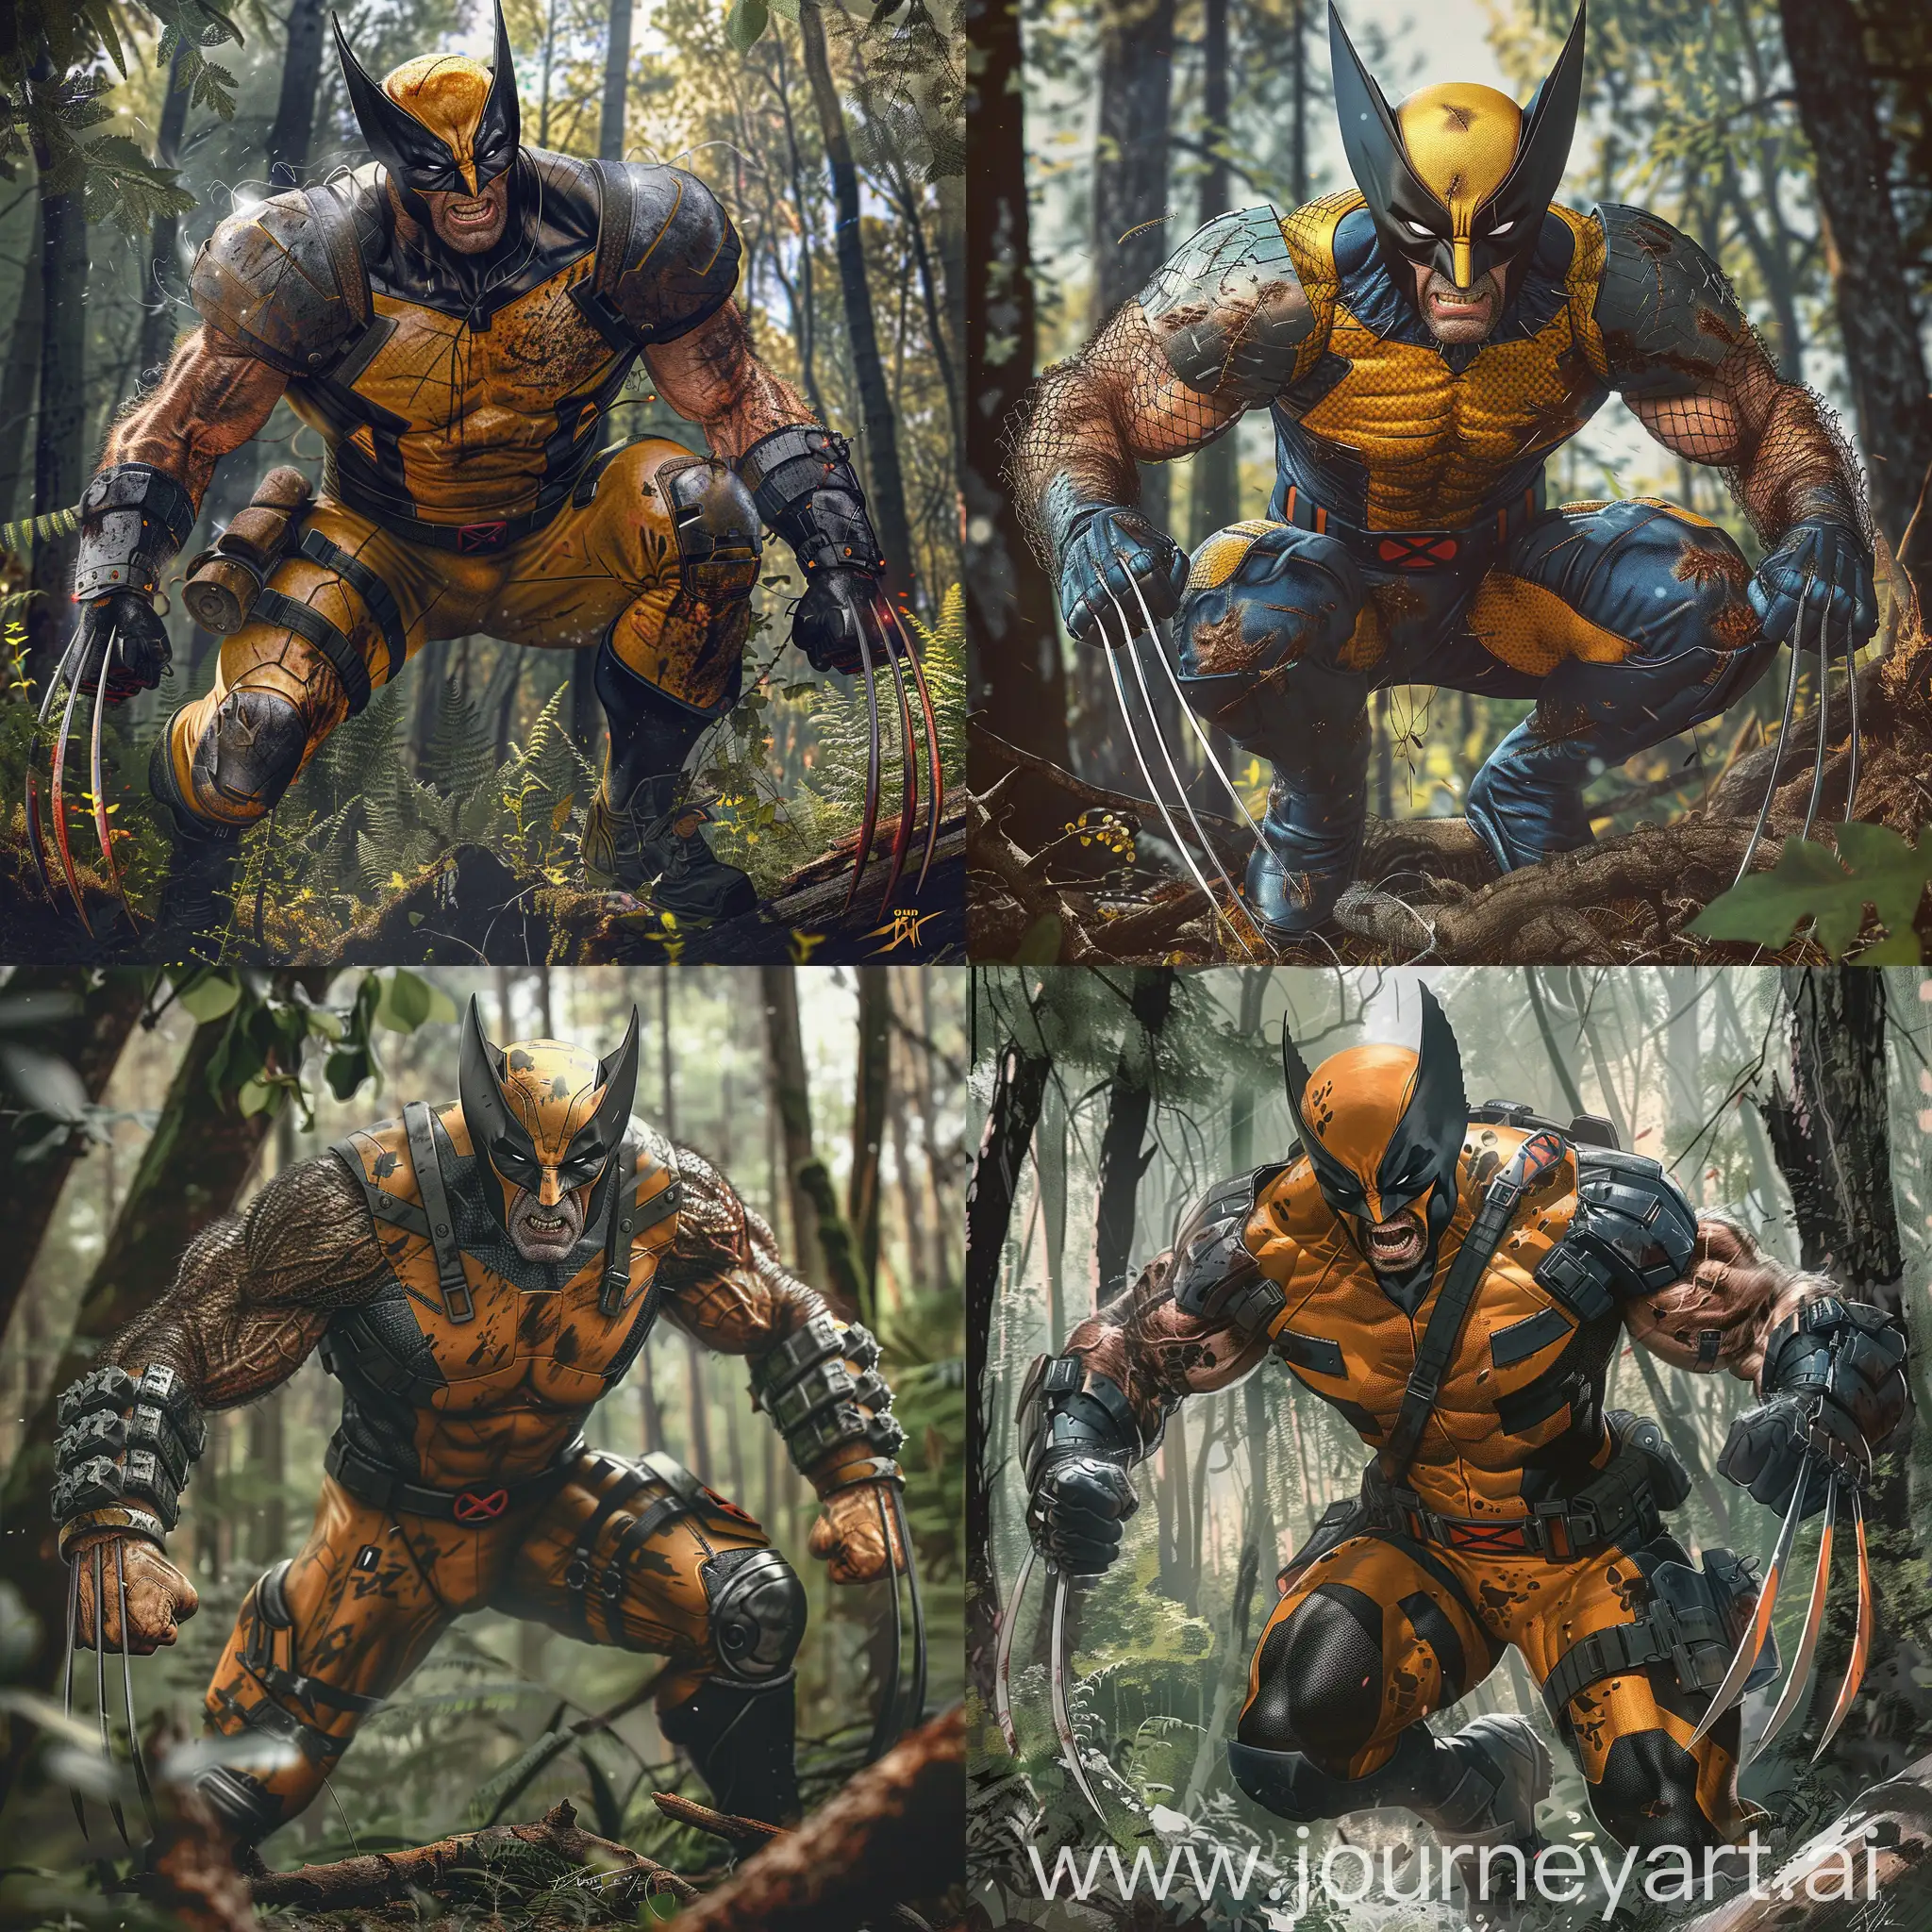 Create a realistic depiction of Wolverine wearing his classic costume, but with detailed modifications. The costume should resemble a tactical combat suit, with a mesh-like texture. Ensure the portrayal captures Wolverine's iconic features, including his adamantium claws, rugged appearance, and intense demeanor. Place Wolverine in a forest setting, depicted in full-body view, poised and ready to attack."